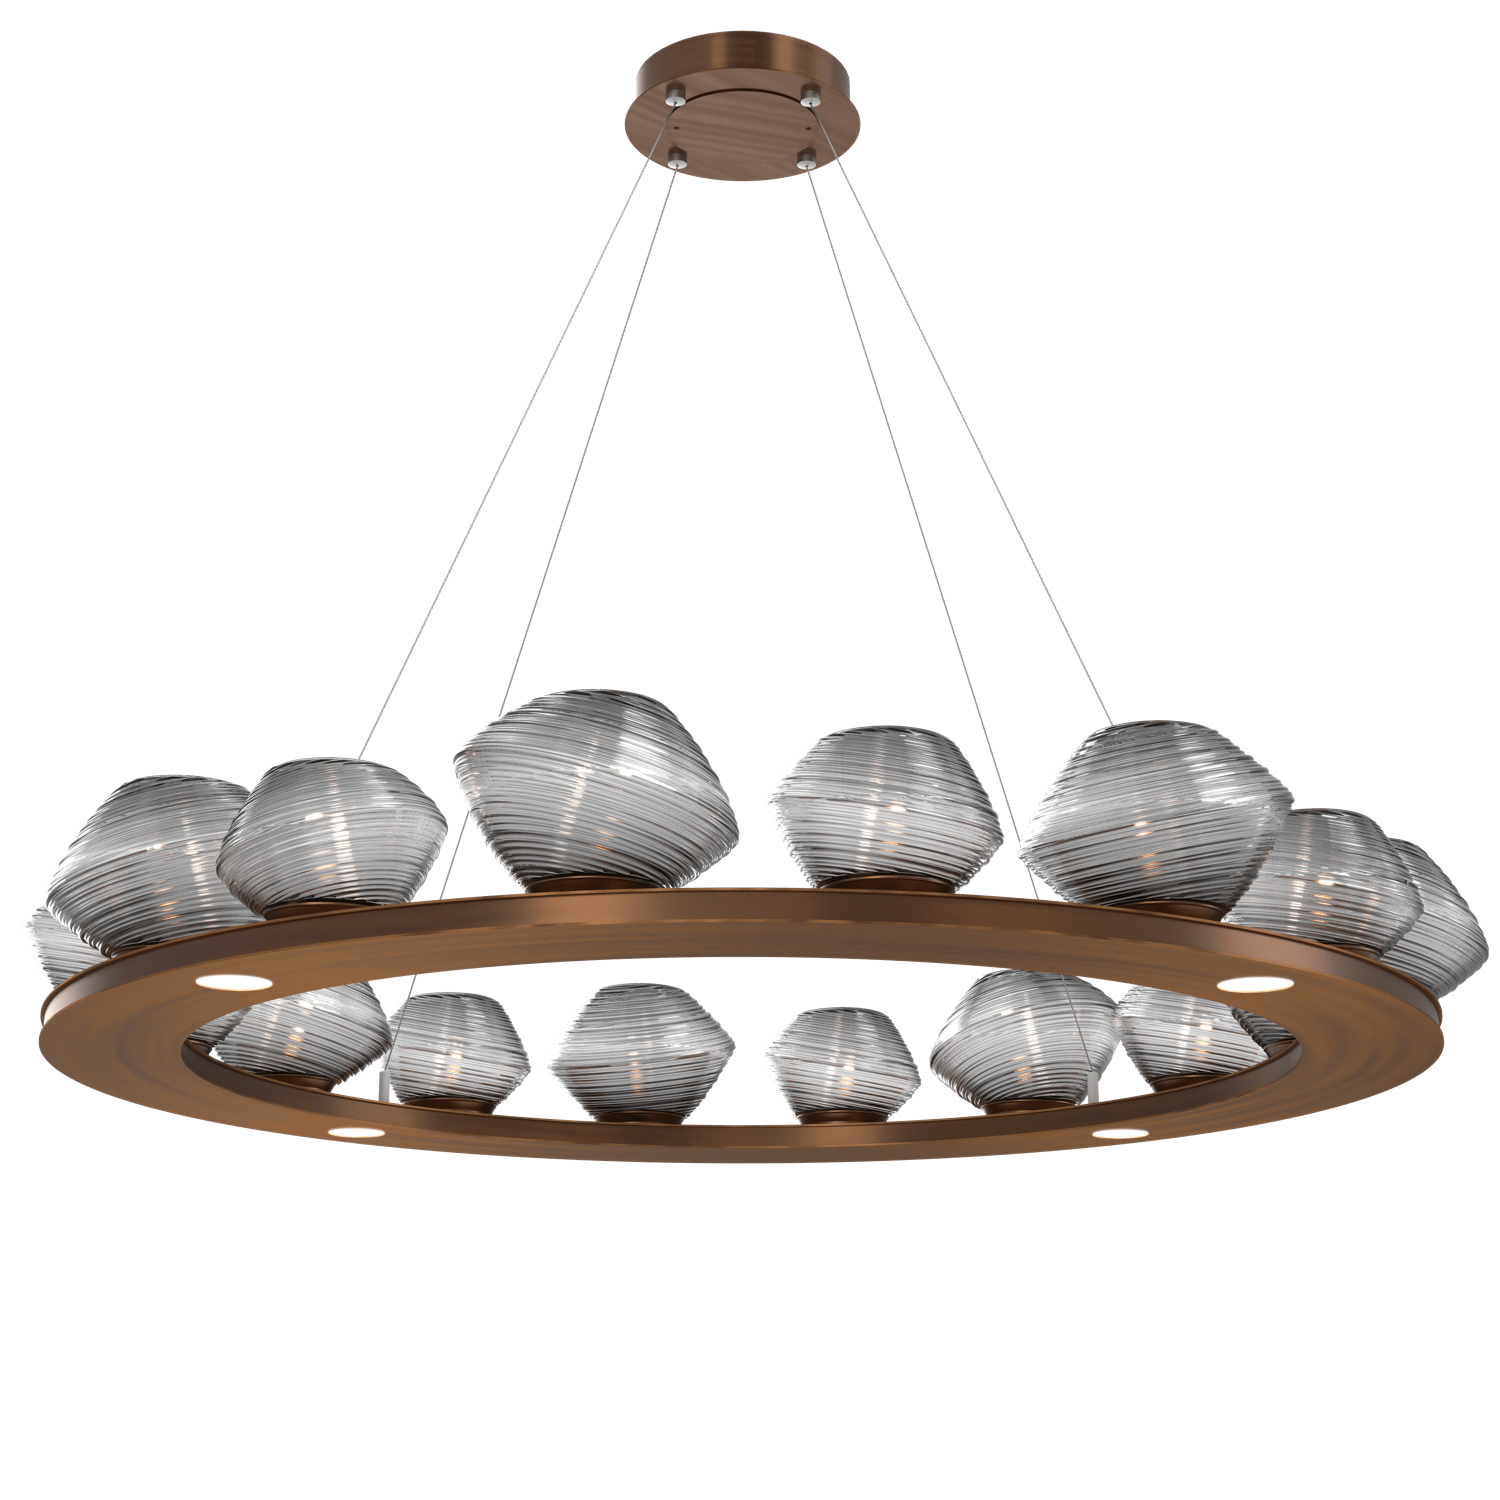 CHB0089-0D-RB-S-Hammerton-Studio-Mesa-48-inch-ring-chandelier-with-oil-rubbed-bronze-finish-and-smoke-blown-glass-shades-and-LED-lamping